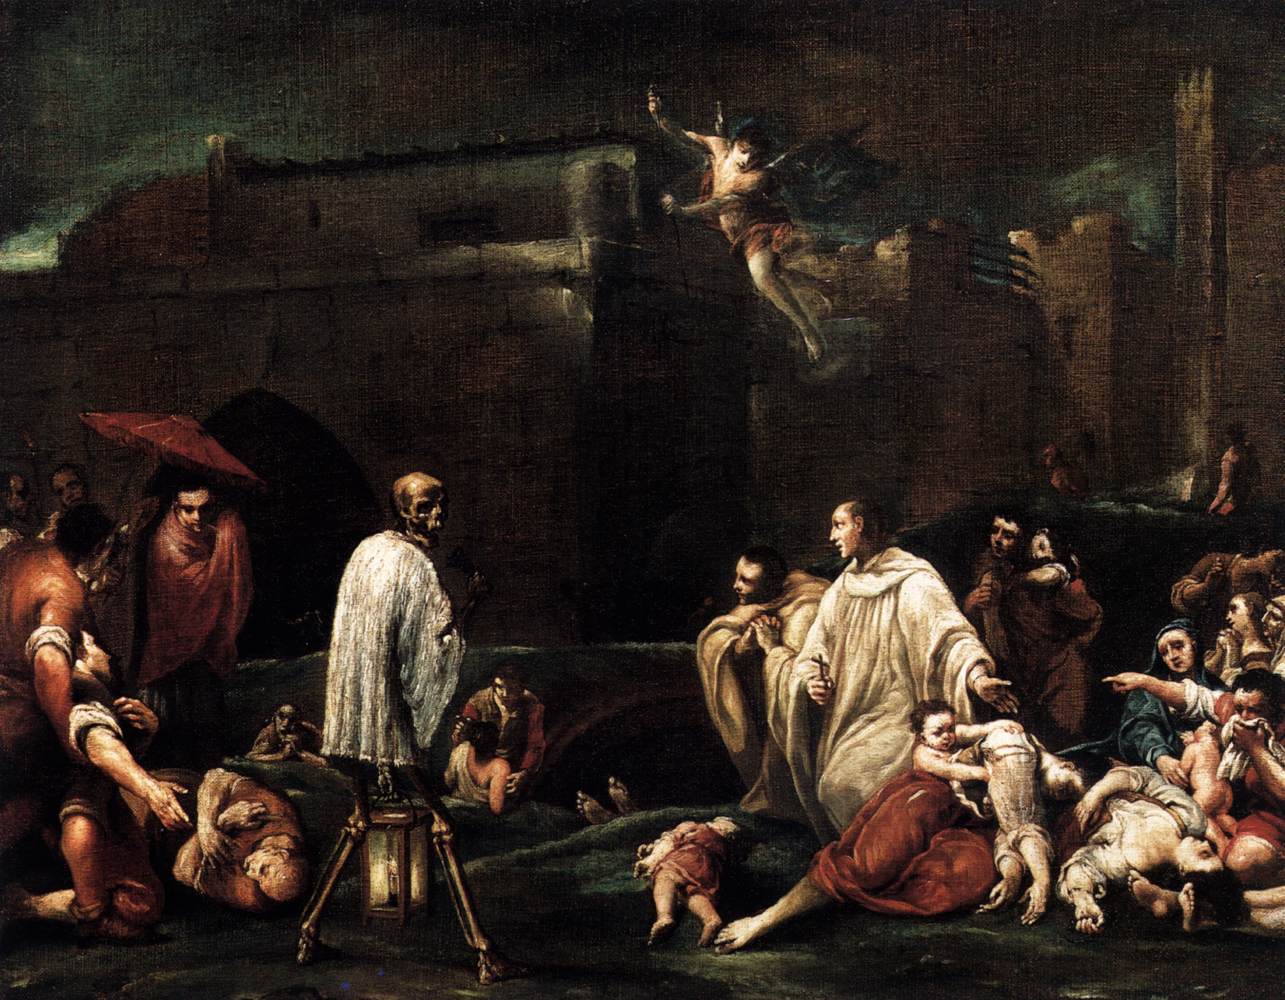 This painting is a variation of a work by Giuseppe Maria Crespi. It was painted in the artist's workshop, perhaps by one of Crespi's three sons, The Blessed Bernardo Tolomeo's Intercession for the End of the Plague in Siena, c. 1735, Oil on canvas, 78 x 97 cm, Vienna: Akademie der bildenden Künste